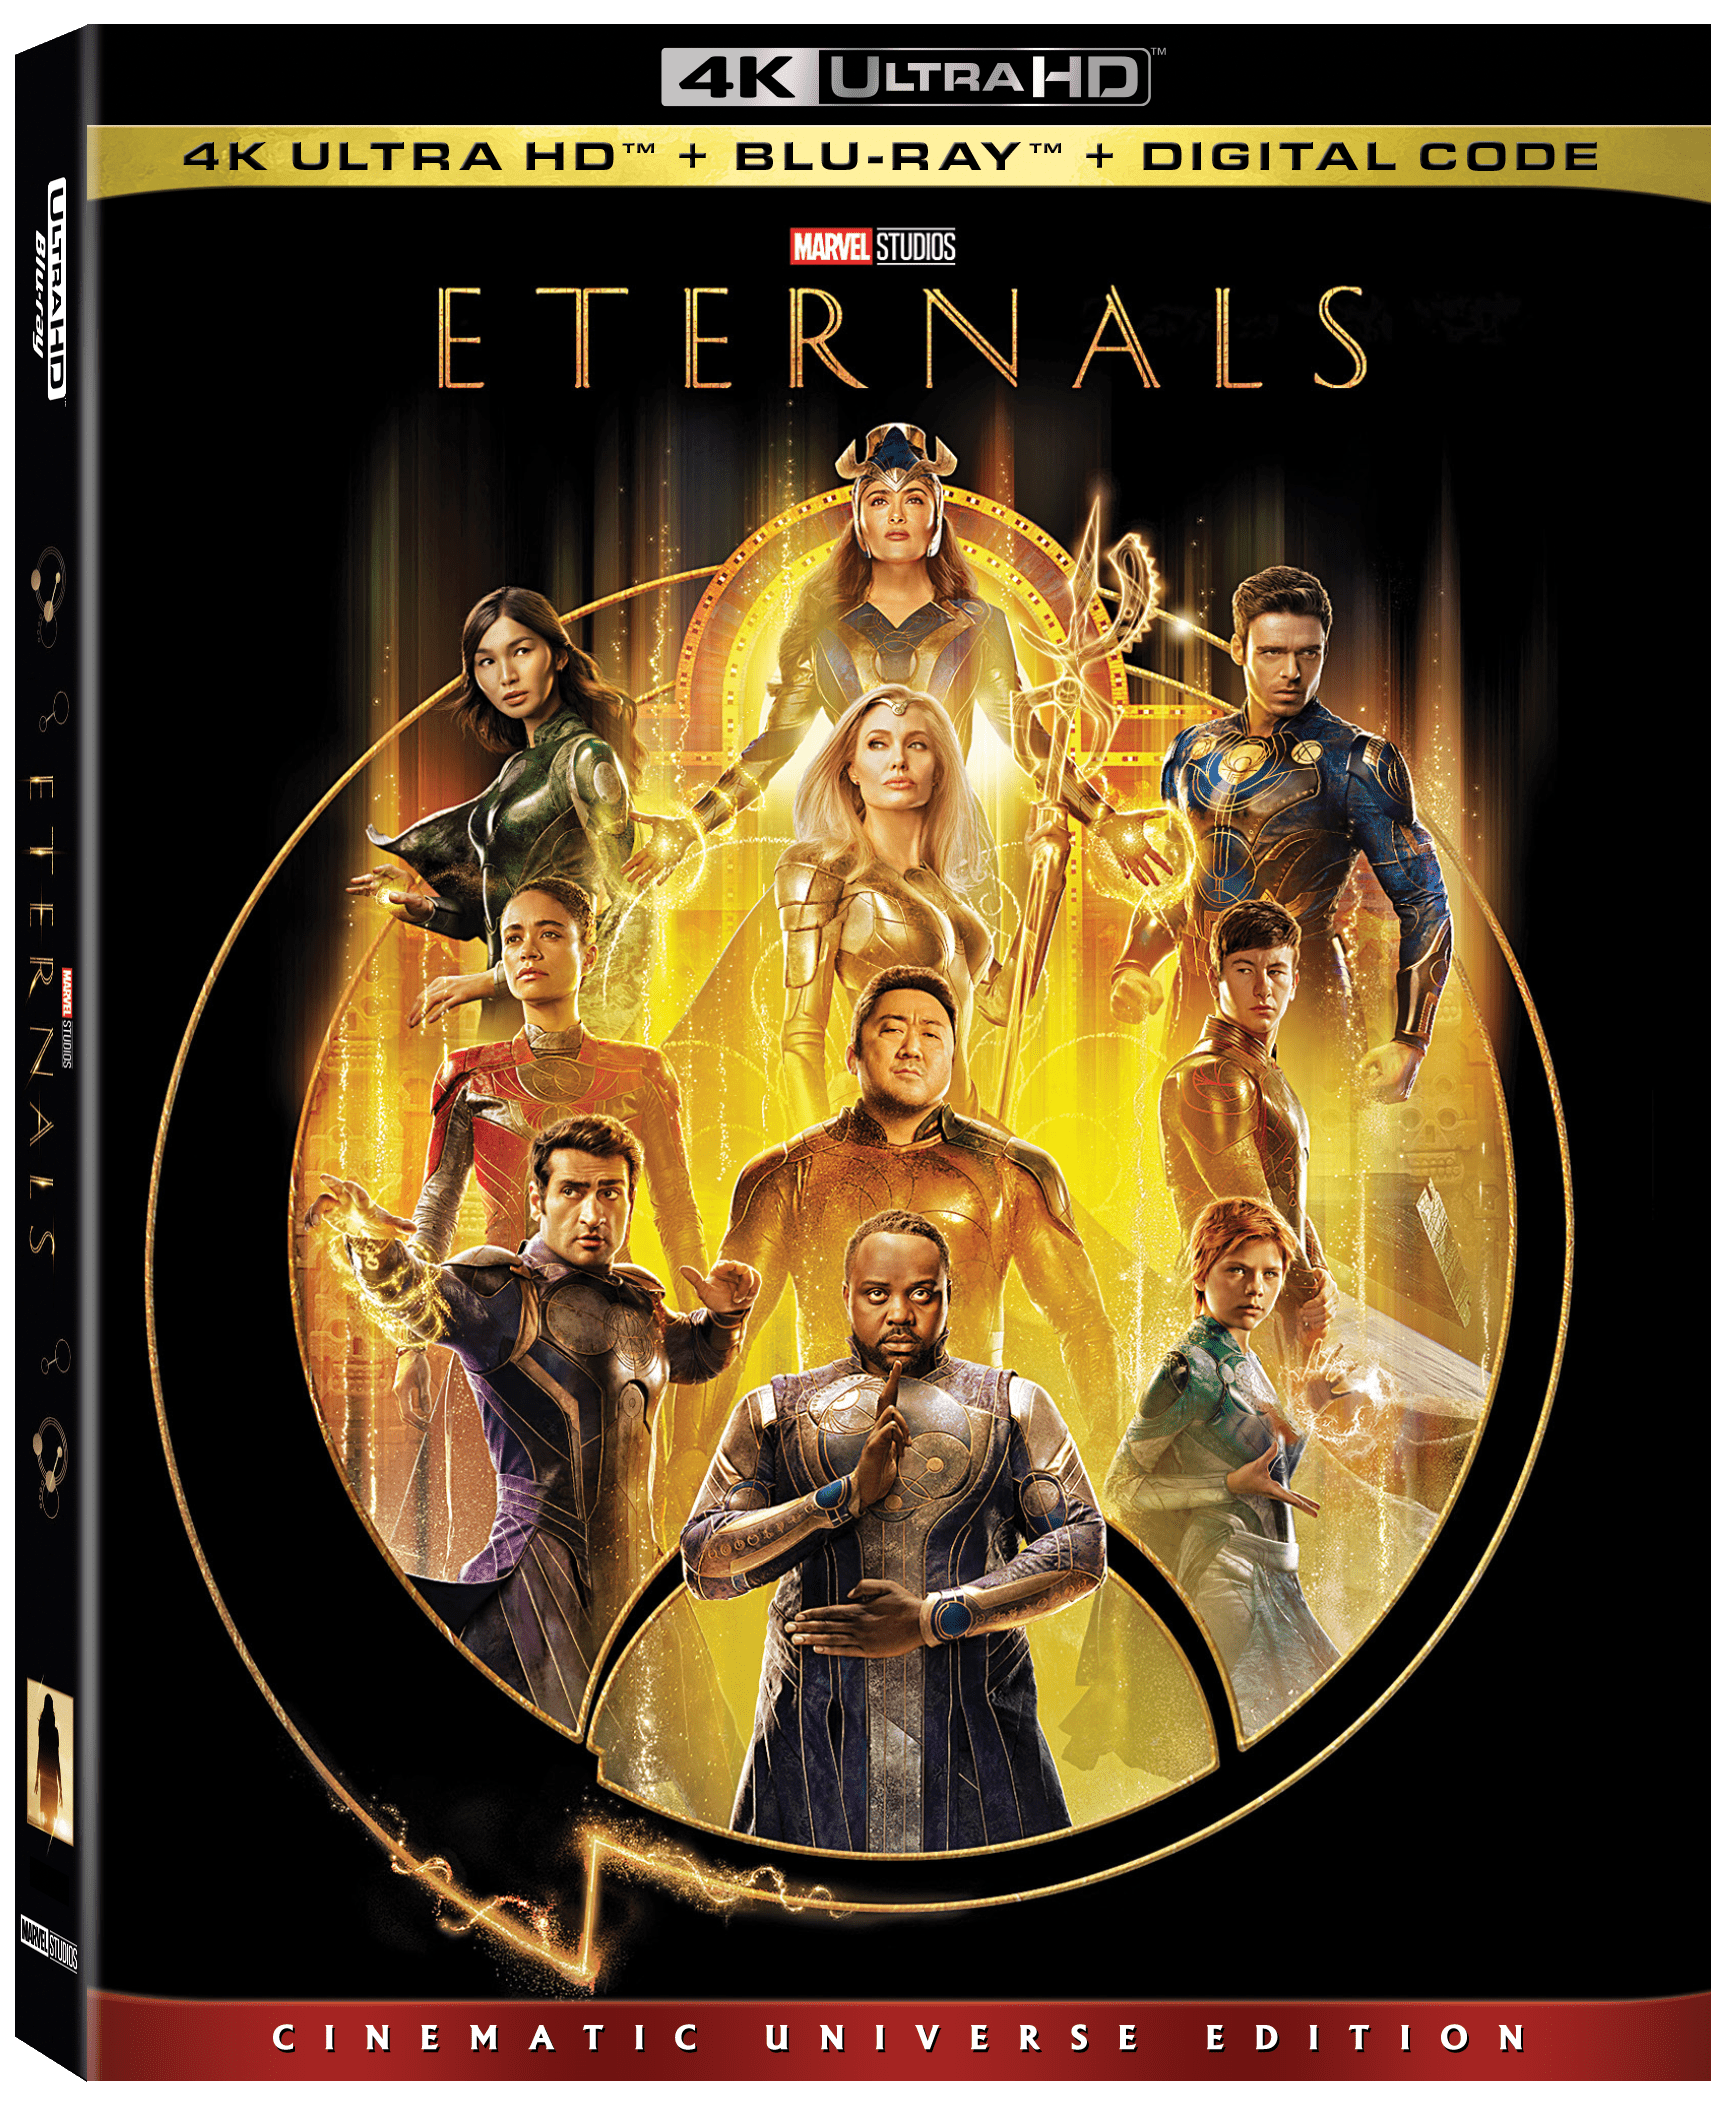 Eternals at home release information